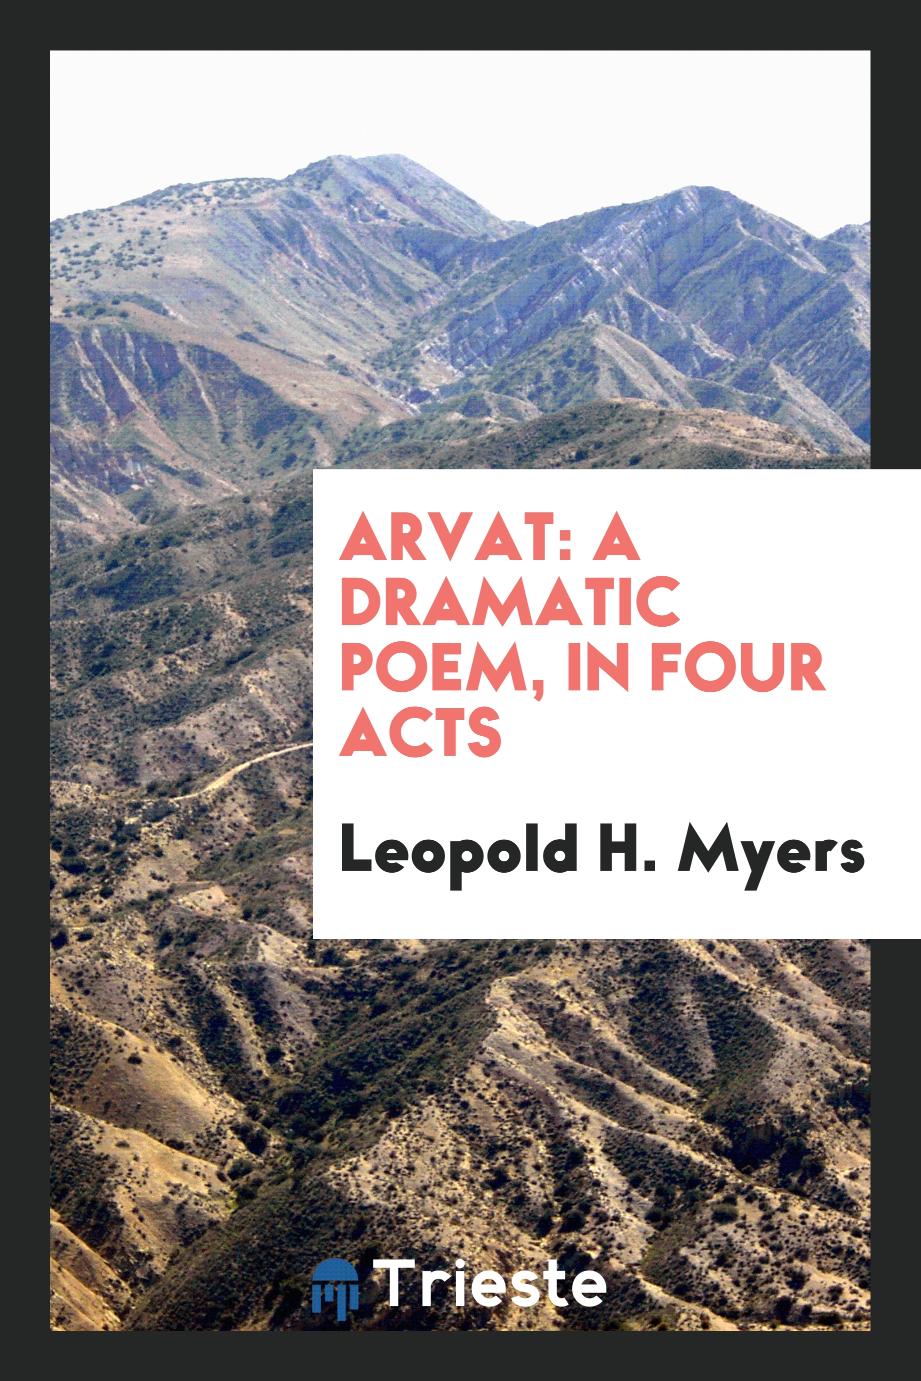 Arvat: A Dramatic Poem, in Four Acts